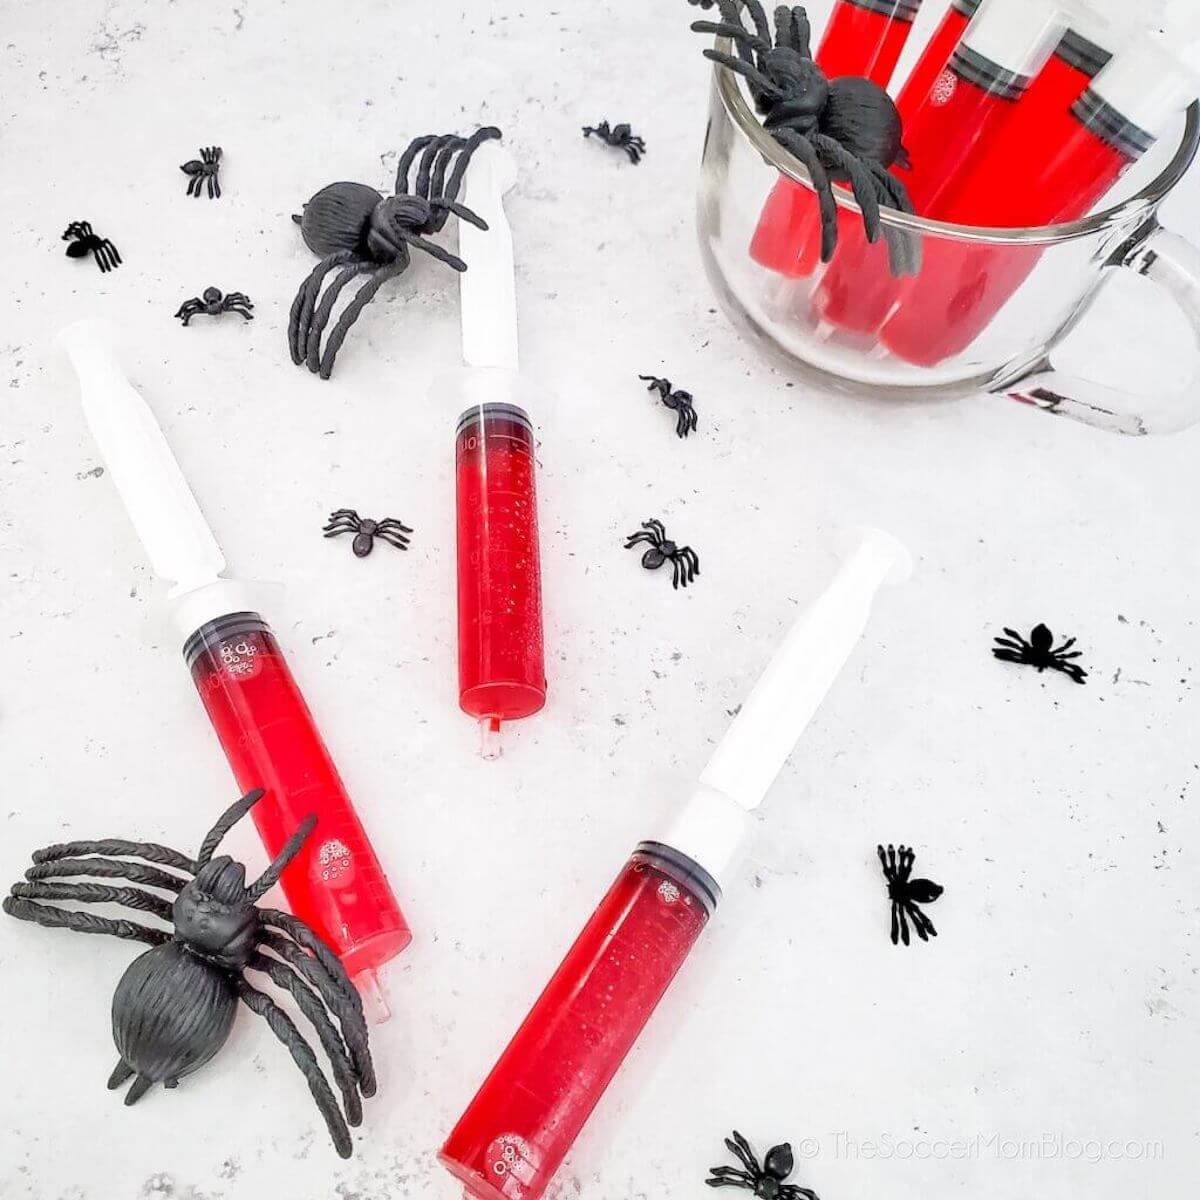 Red halloween jello shots in syringes surrounded by plastic spiders.